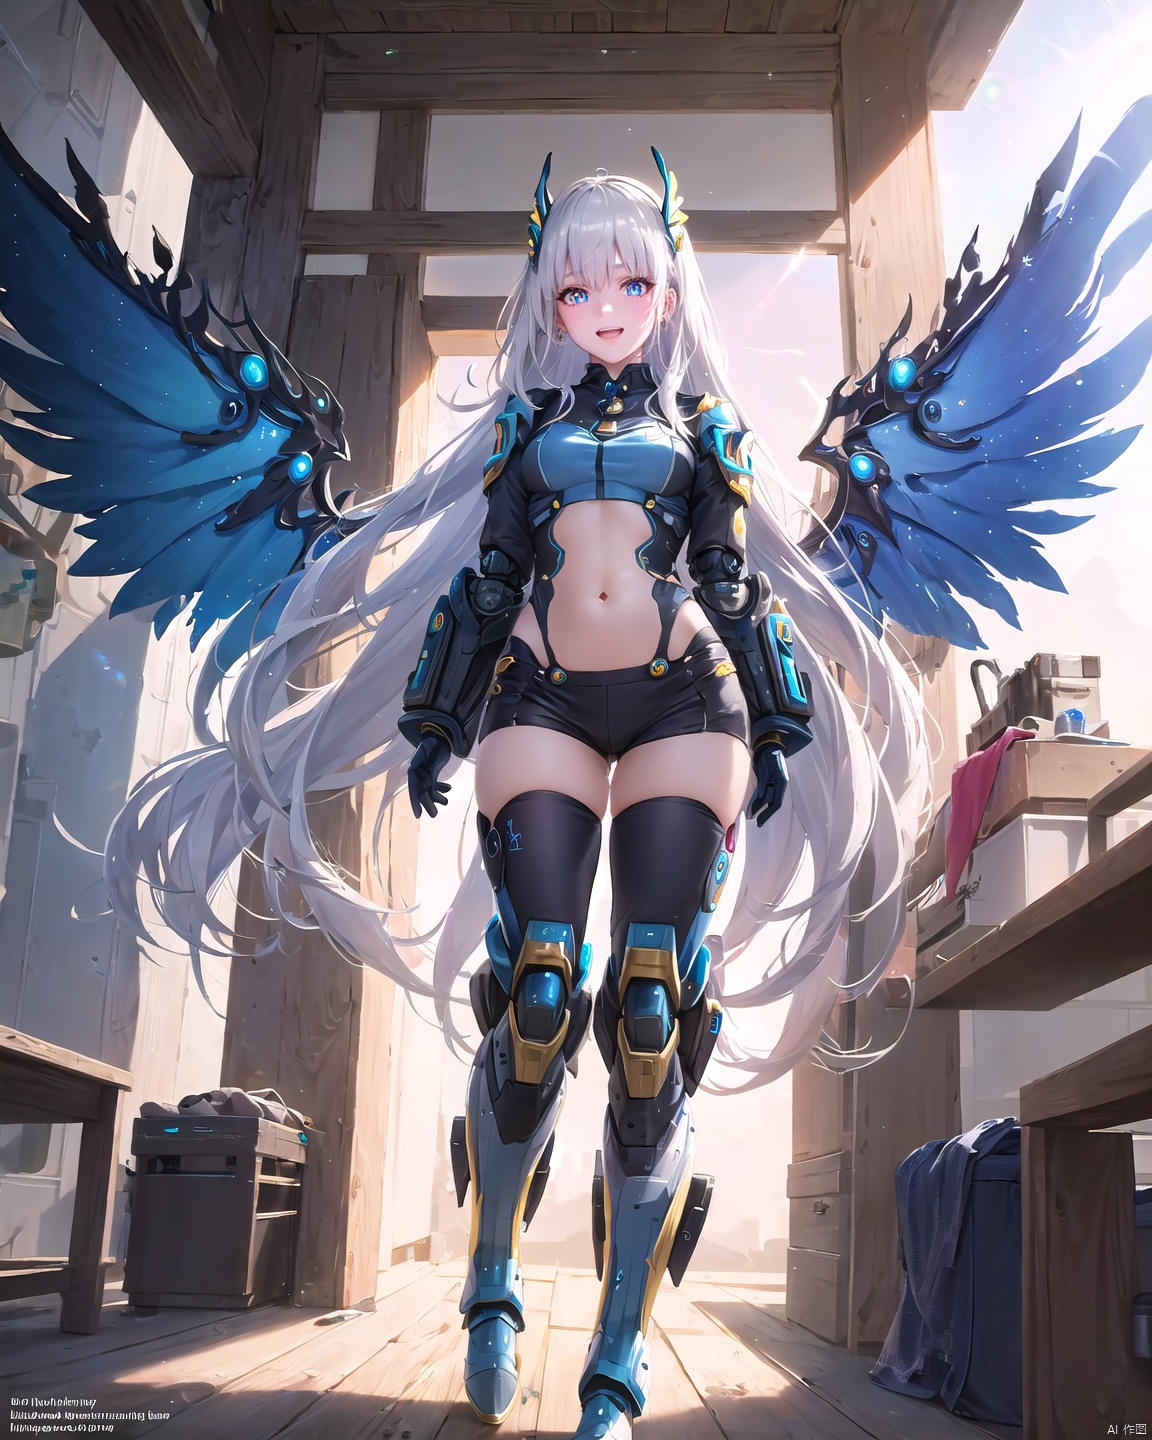 1 18-year-old beautiful girl +(detailed face)+ white hair + long hair + bangs + sunny and cheerful + blue pupils + mechanical legs + boots + wings Apocalyptic + sci-fi mechanical wings with fan +More details + color + lens flare,<lora:EMS-273028-EMS:0.800000>